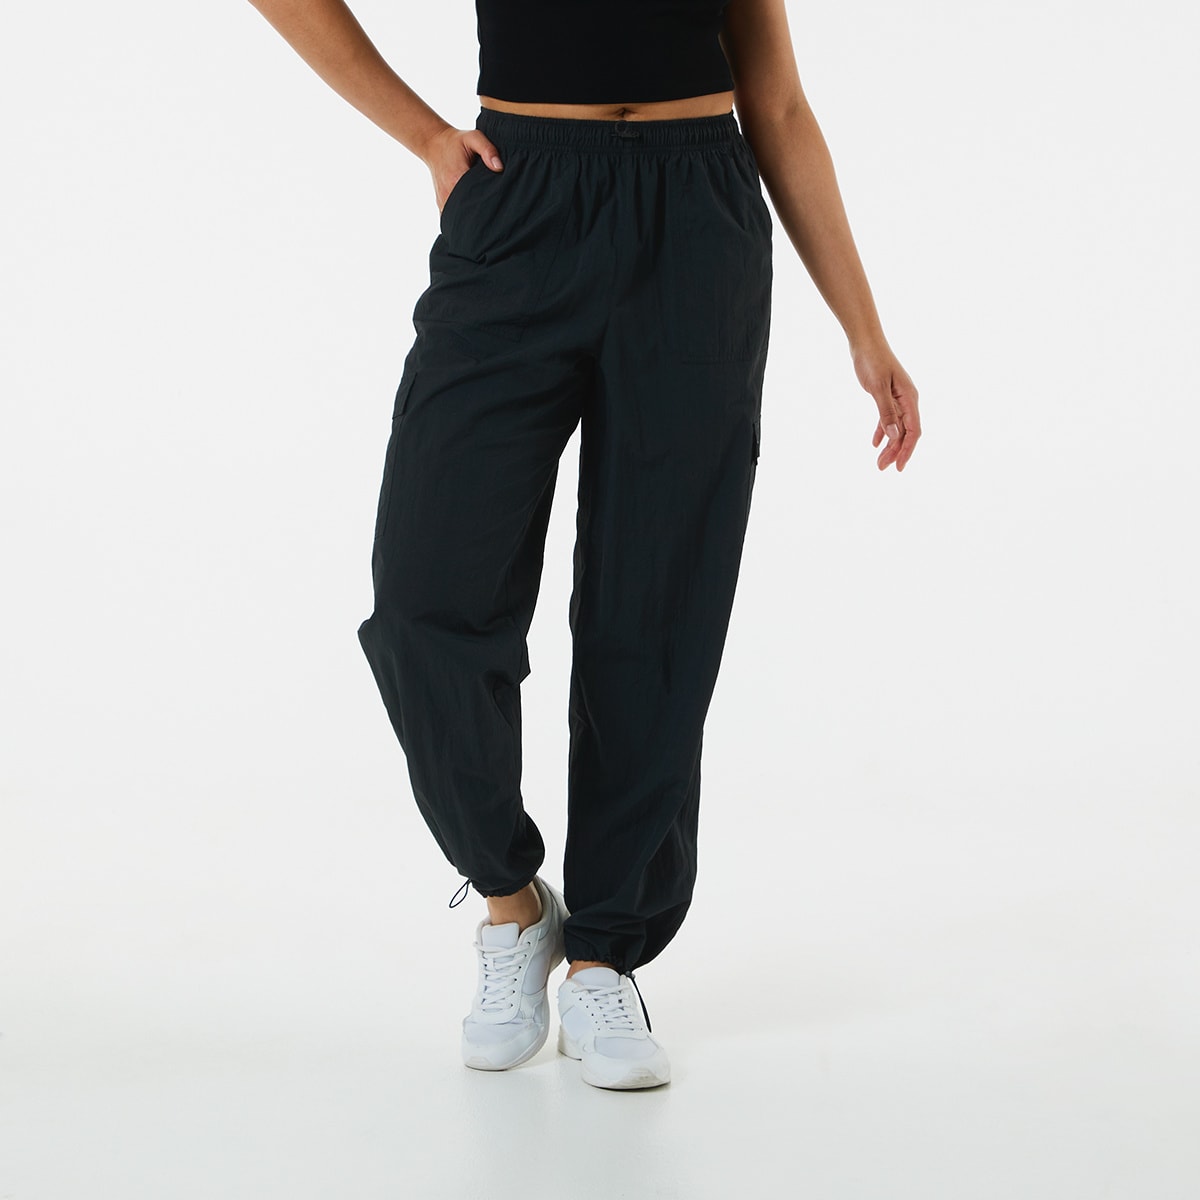 Lockdown loungewear best track pants rated from Big W Kmart Cotton On